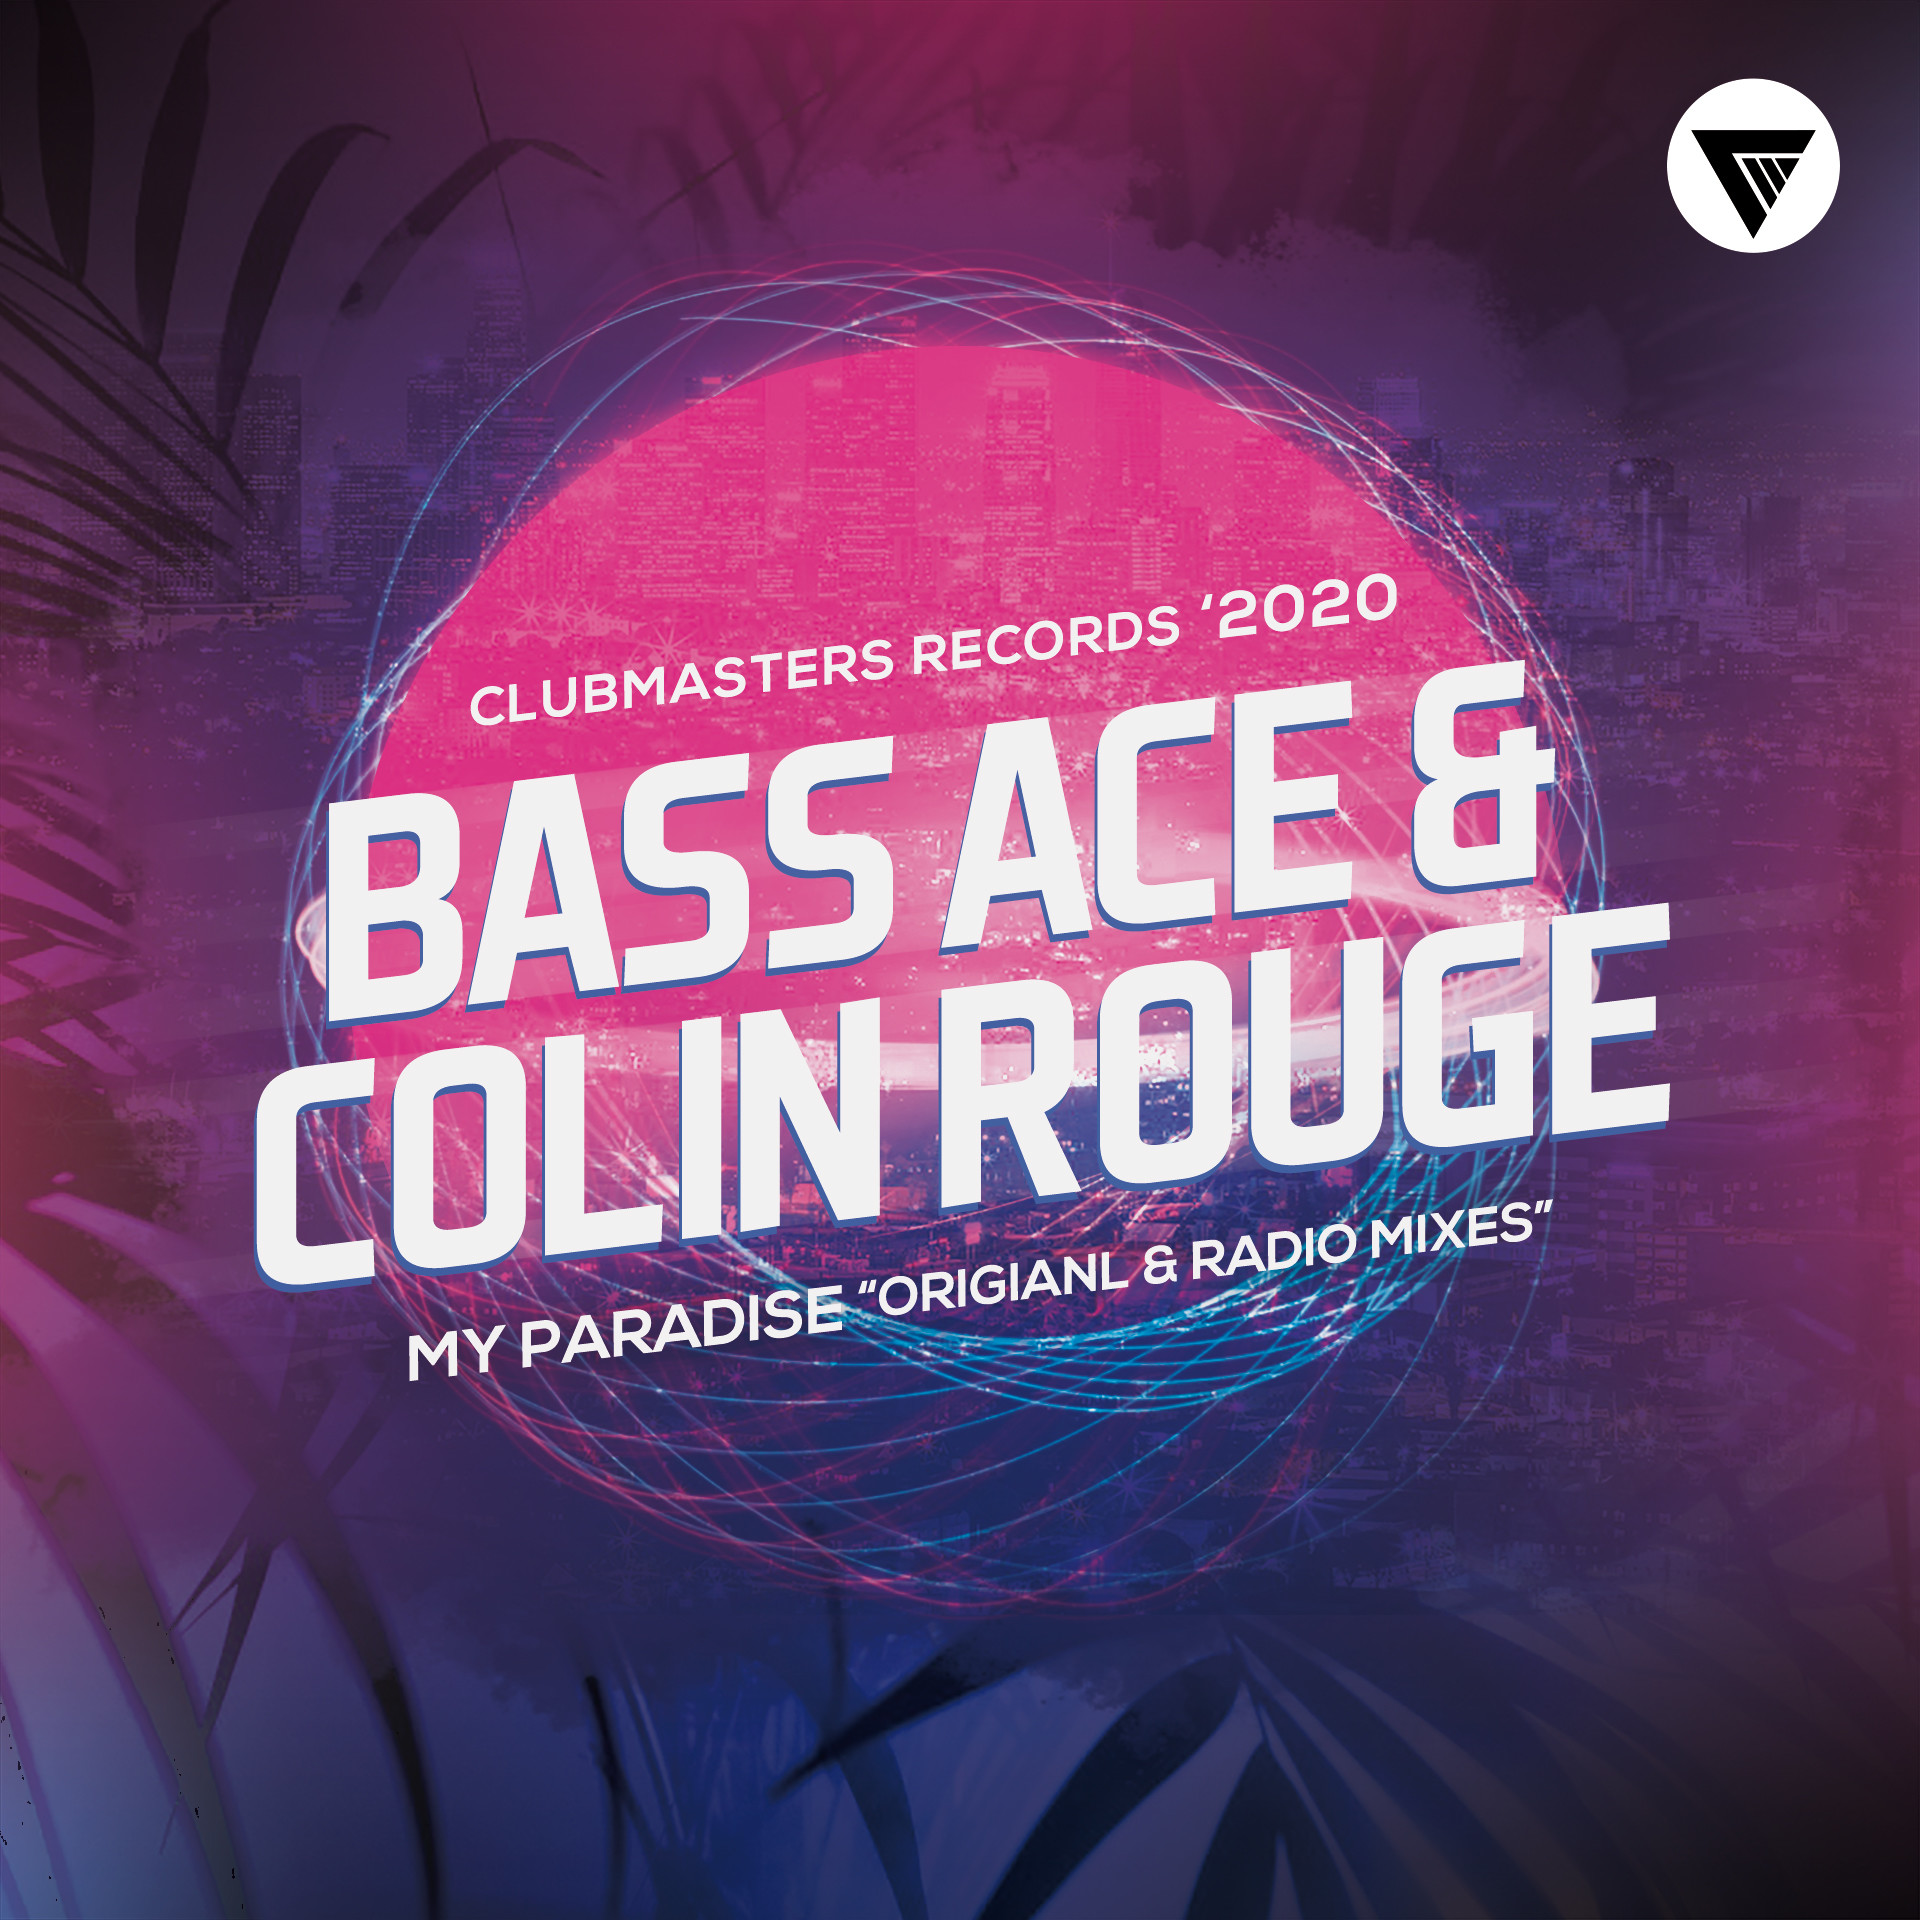 Bass ace. Bass Ace clubmasters. Rouge DJ. Colin rouge feat. Stella j.